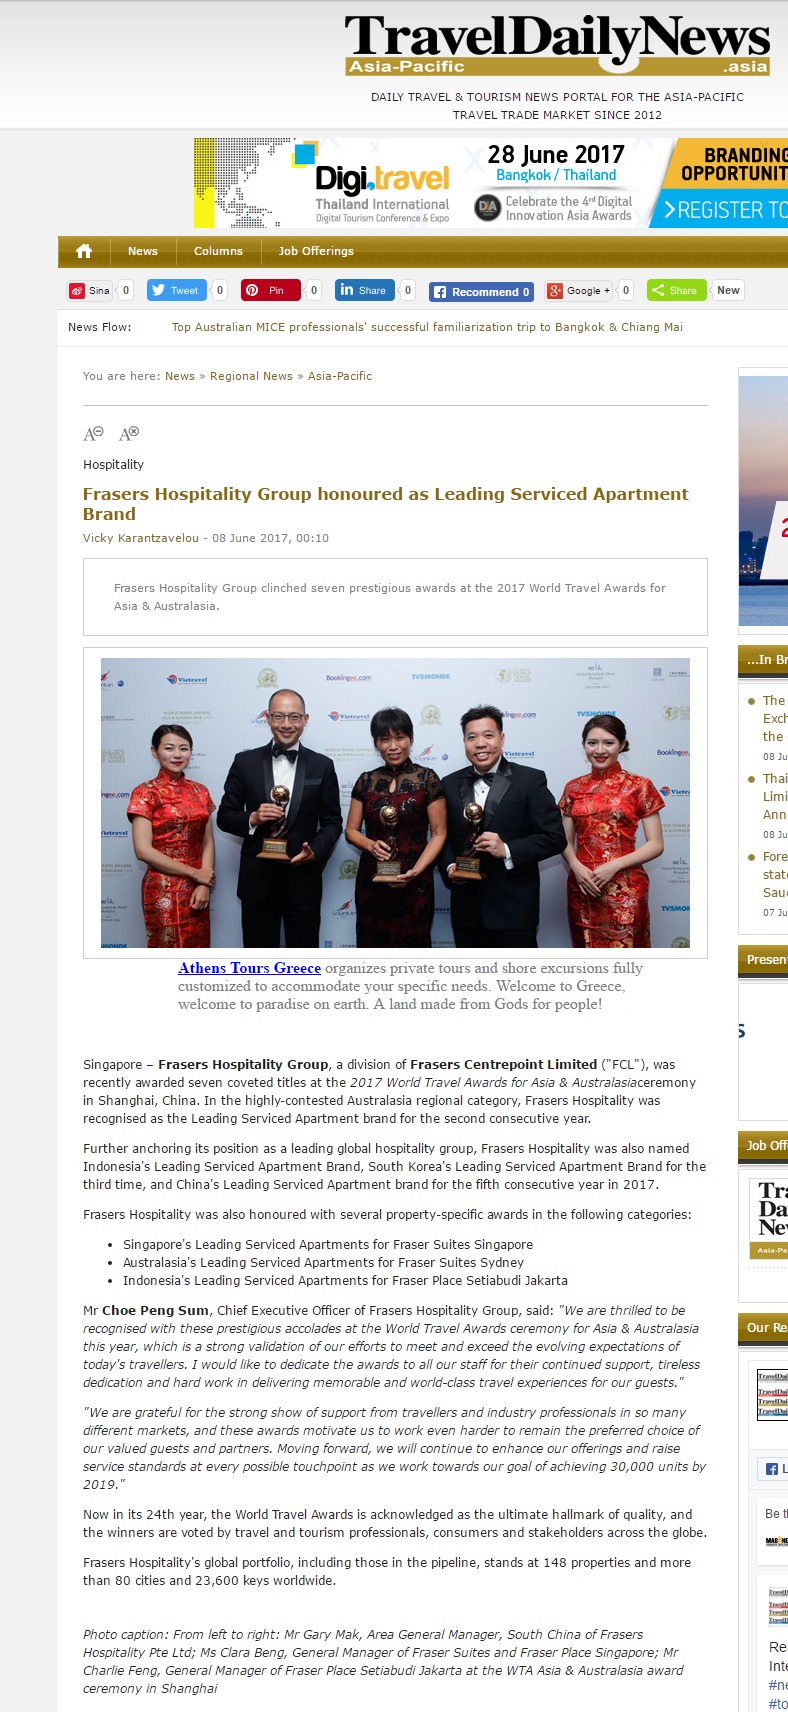 Frasers Hospitality Group honoured as Leading Serviced Apartment Brand